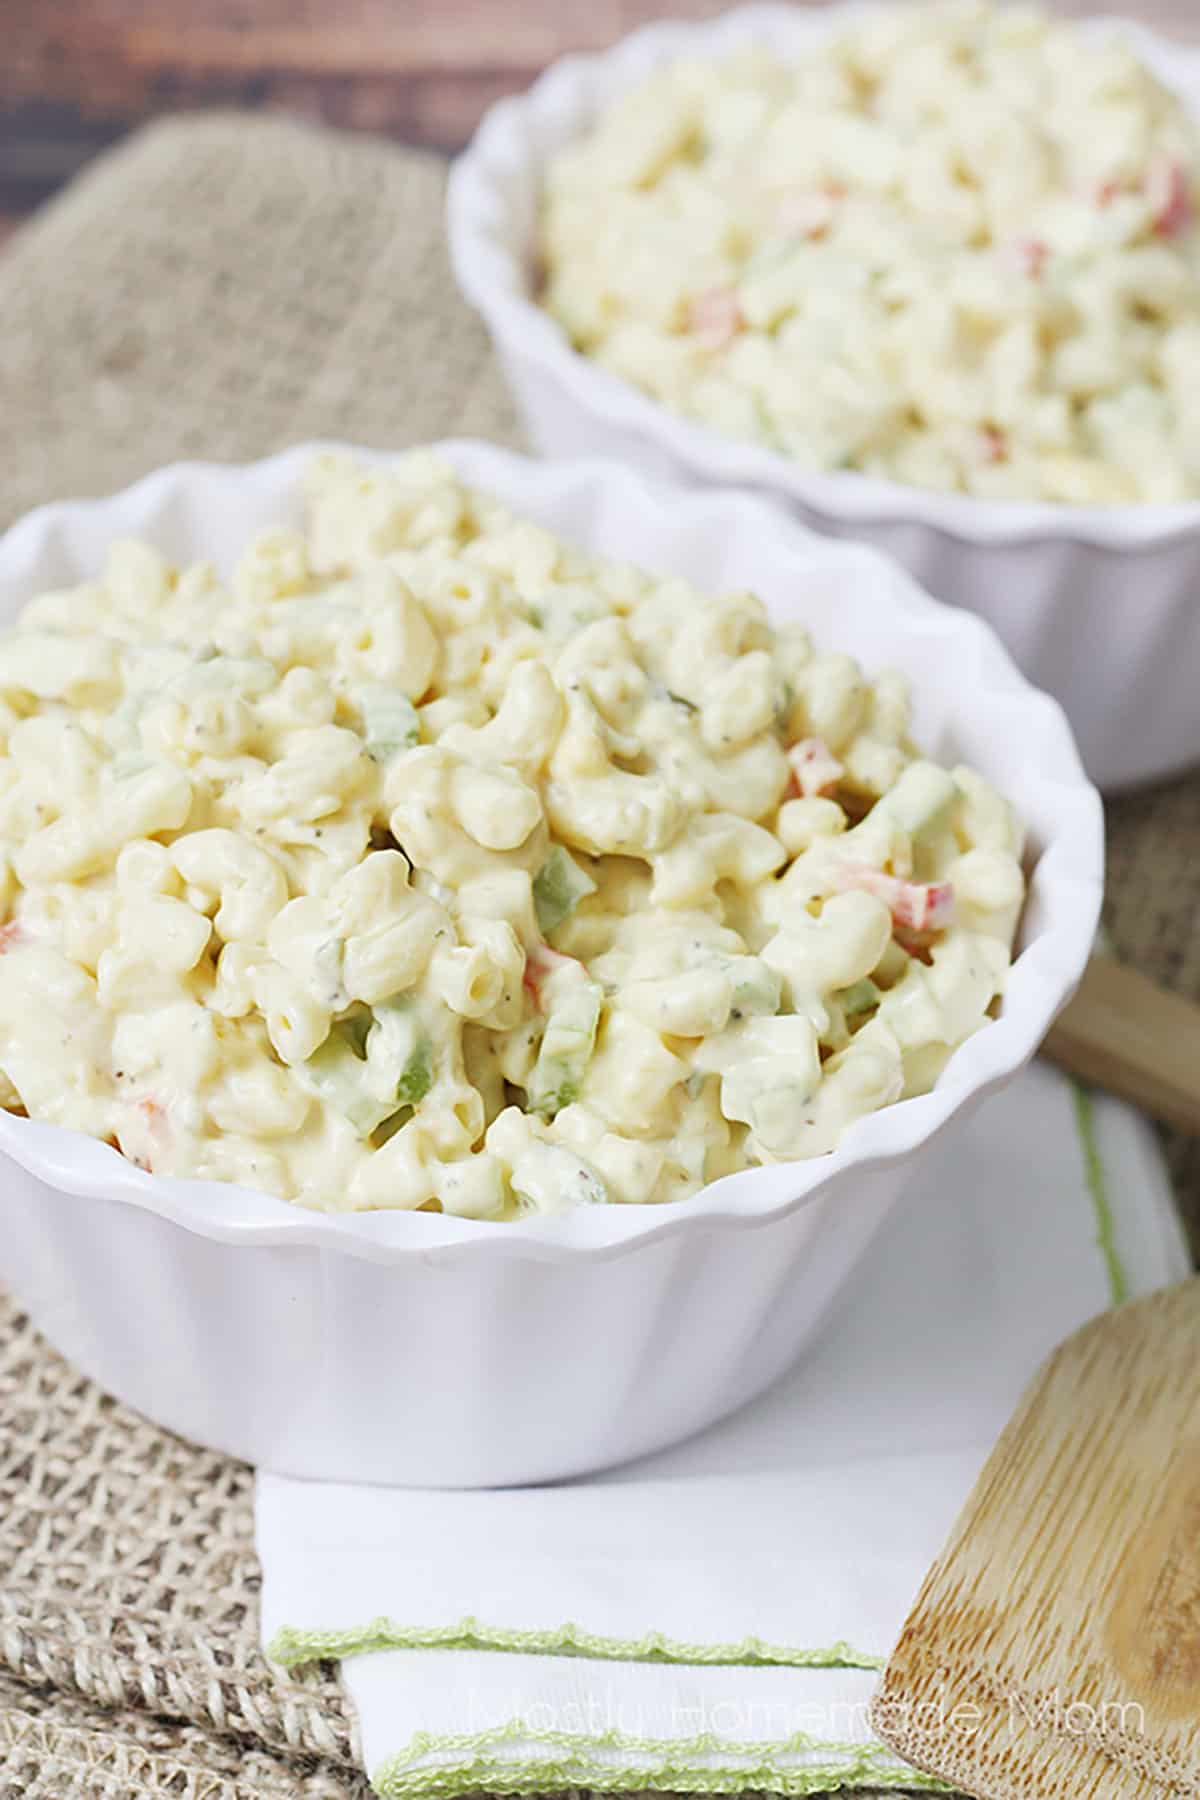 Two serving bowls filled with macaroni salad.